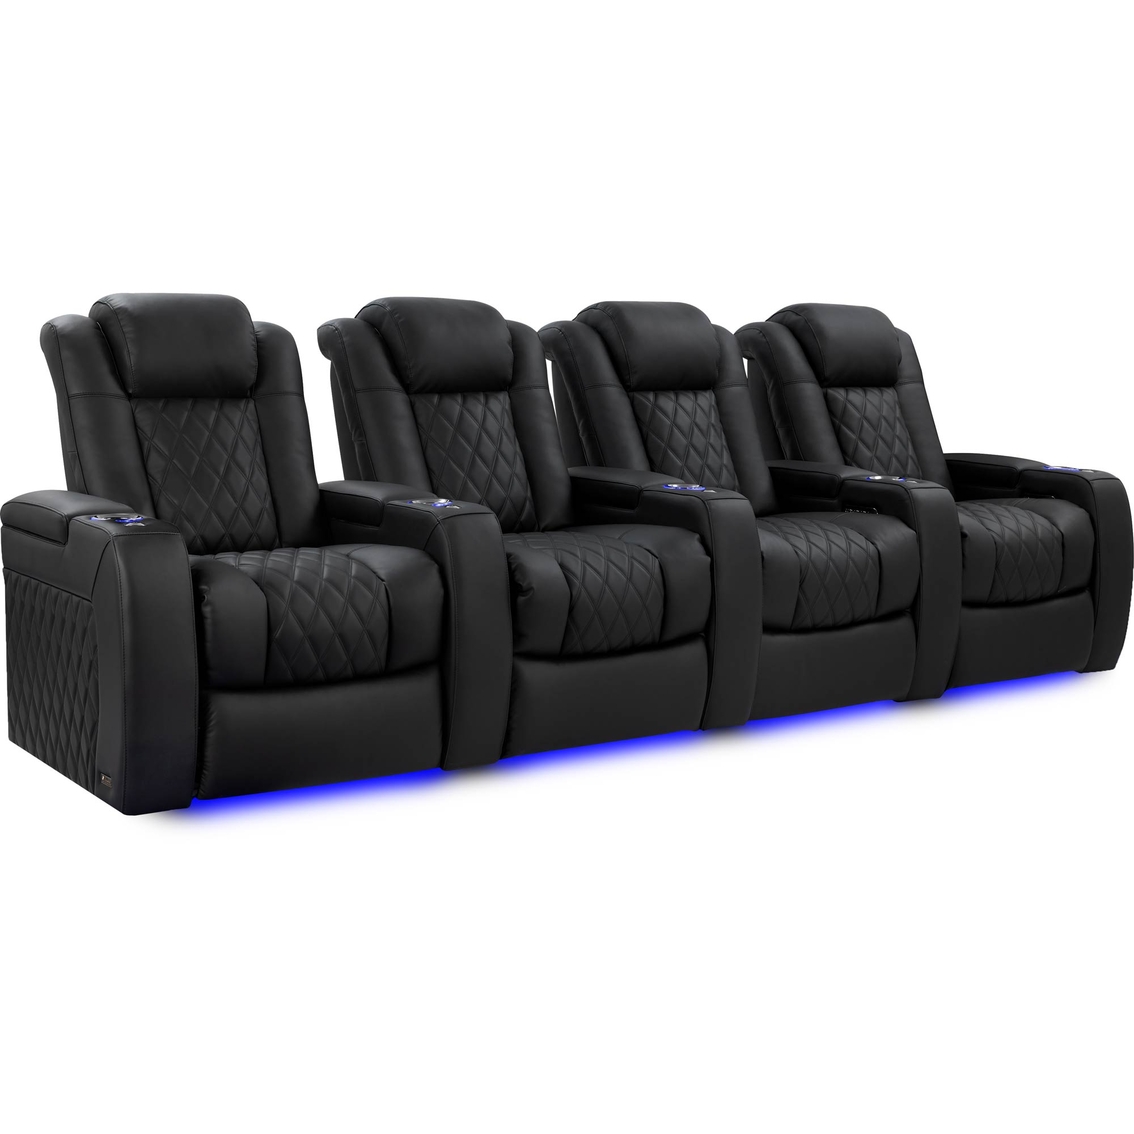 Valencia Tuscany Top Grain Leather Home Theater Seating Row Of 4 ...